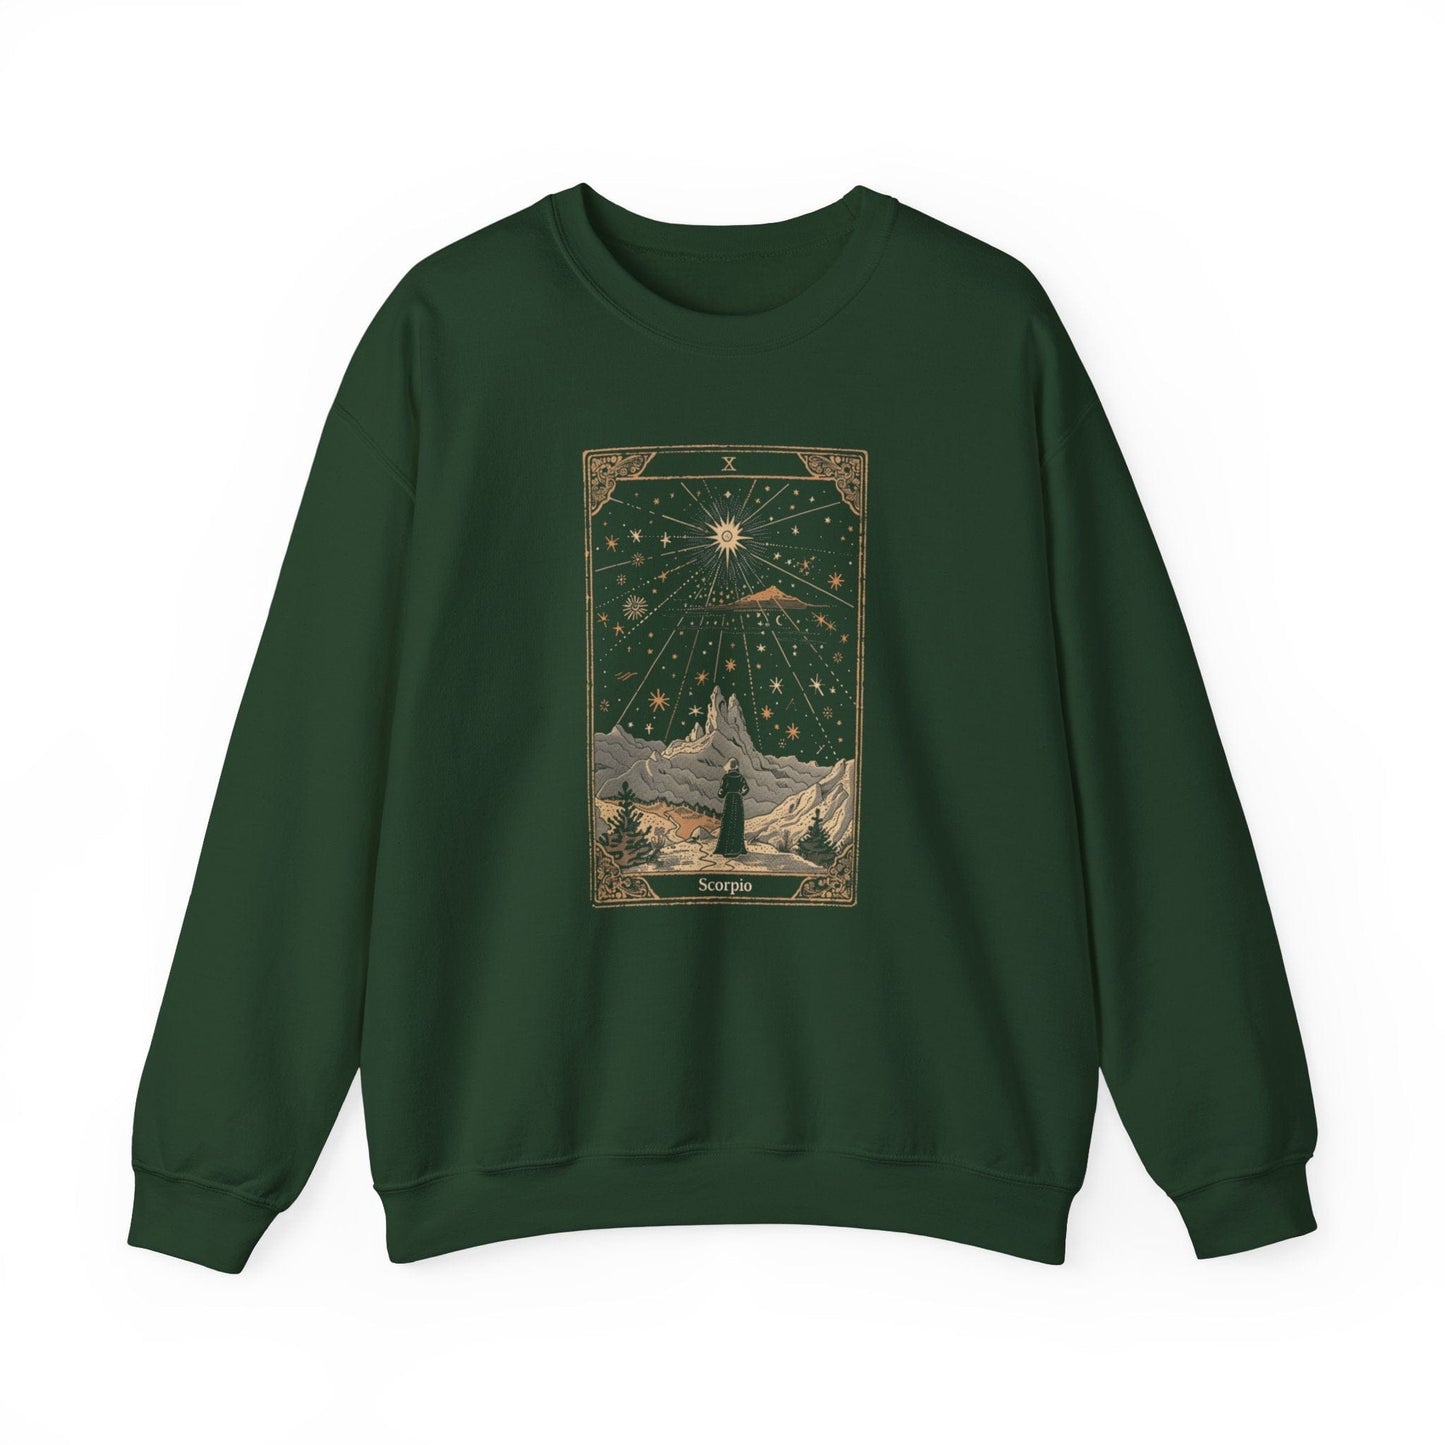 Sweatshirt S / Forest Green The Ambitious Visionary Scorpio Extra Soft Sweater